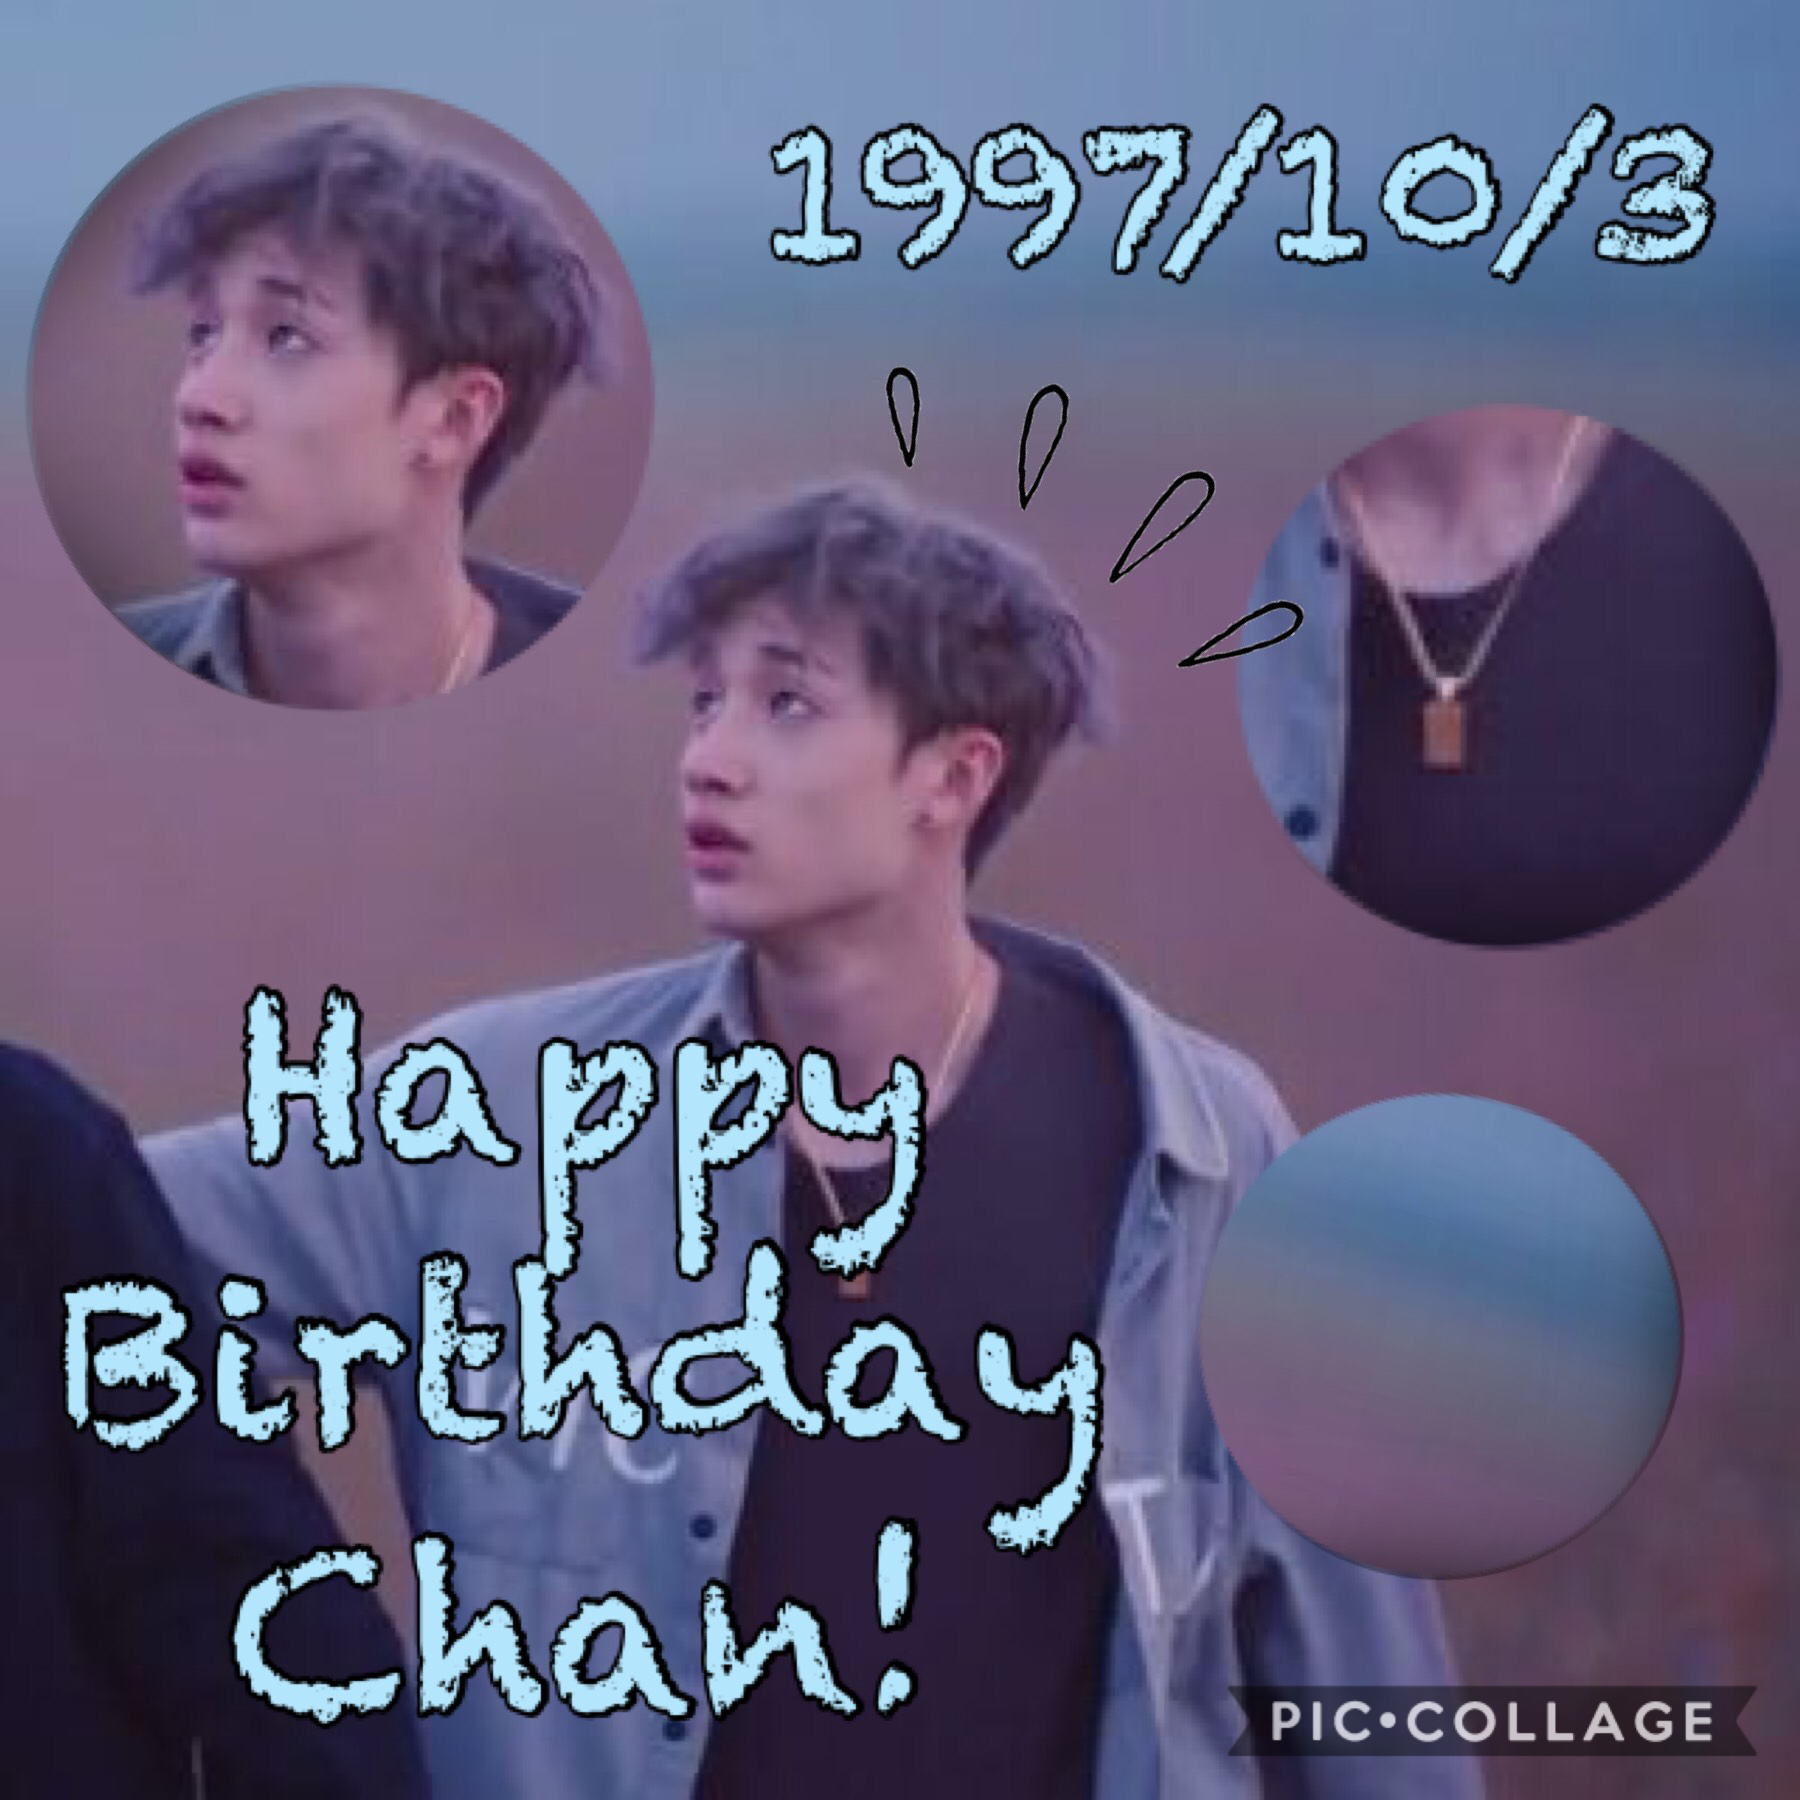 Happy Birthday Chan! I legit just became a fan of Stray Kids and I’m already starting to stan them. 👏🏻👍🏻 